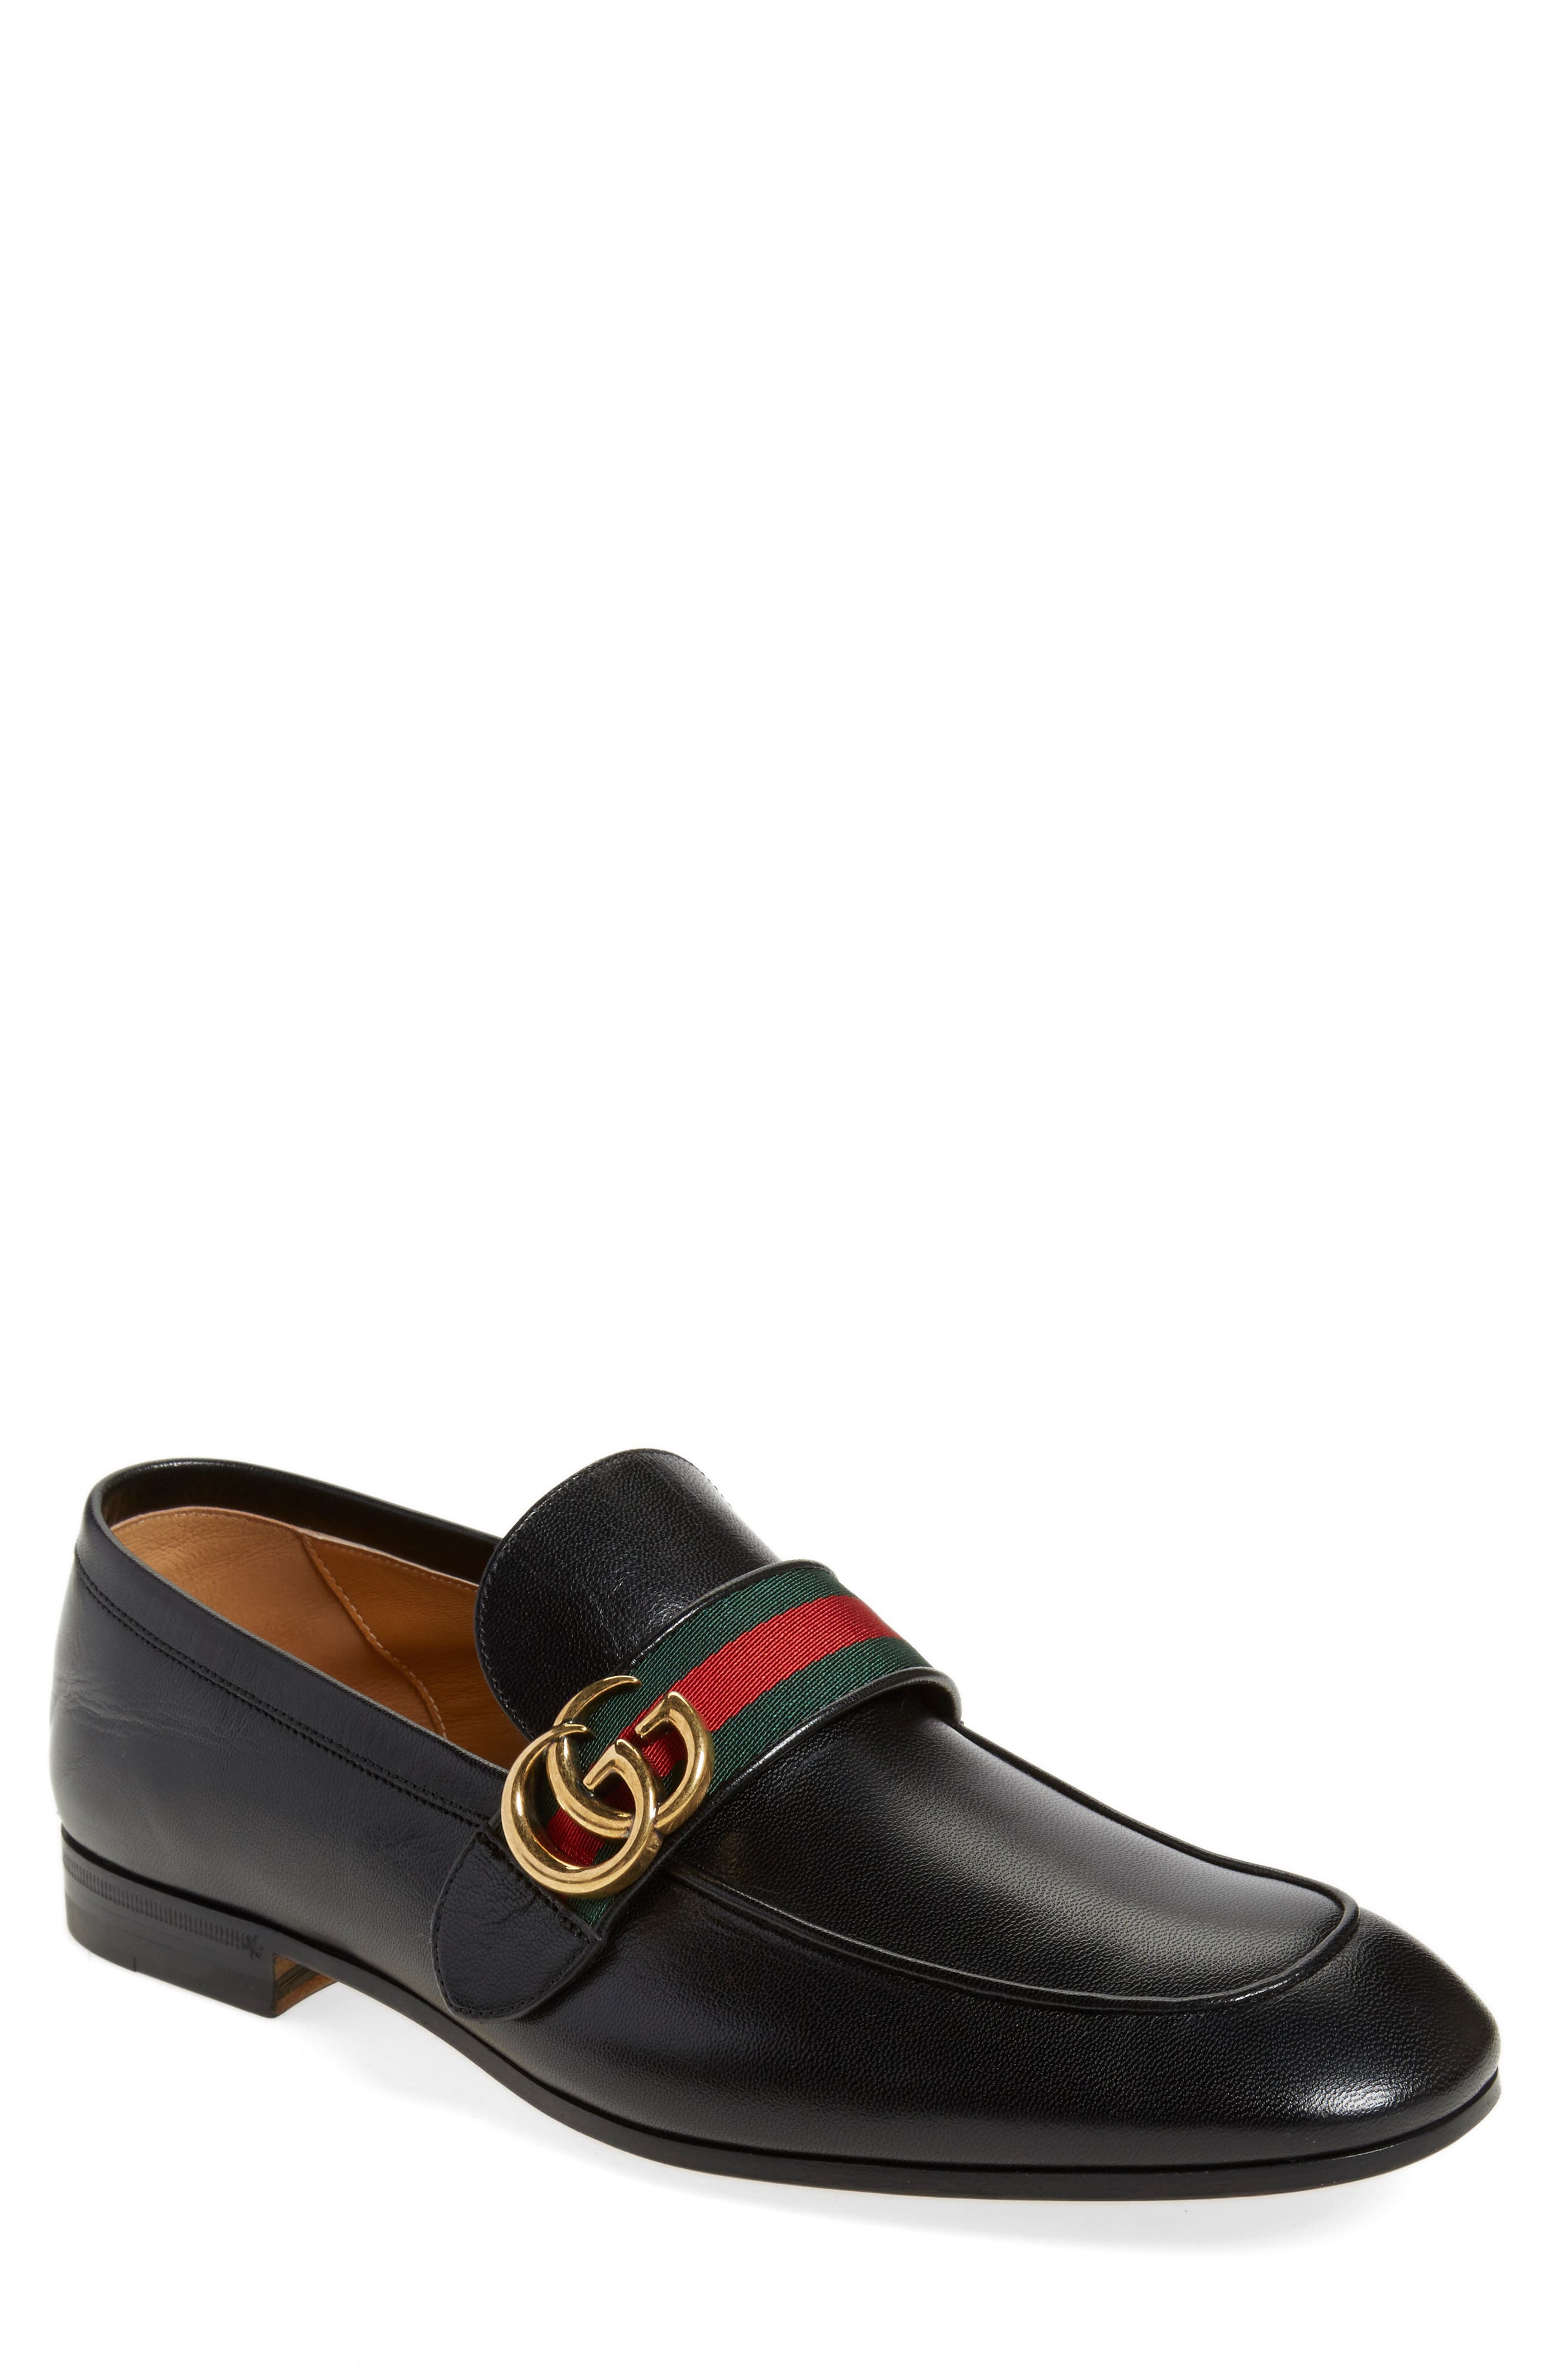 Gucci Donnie Double G Loafer | Nordstrom